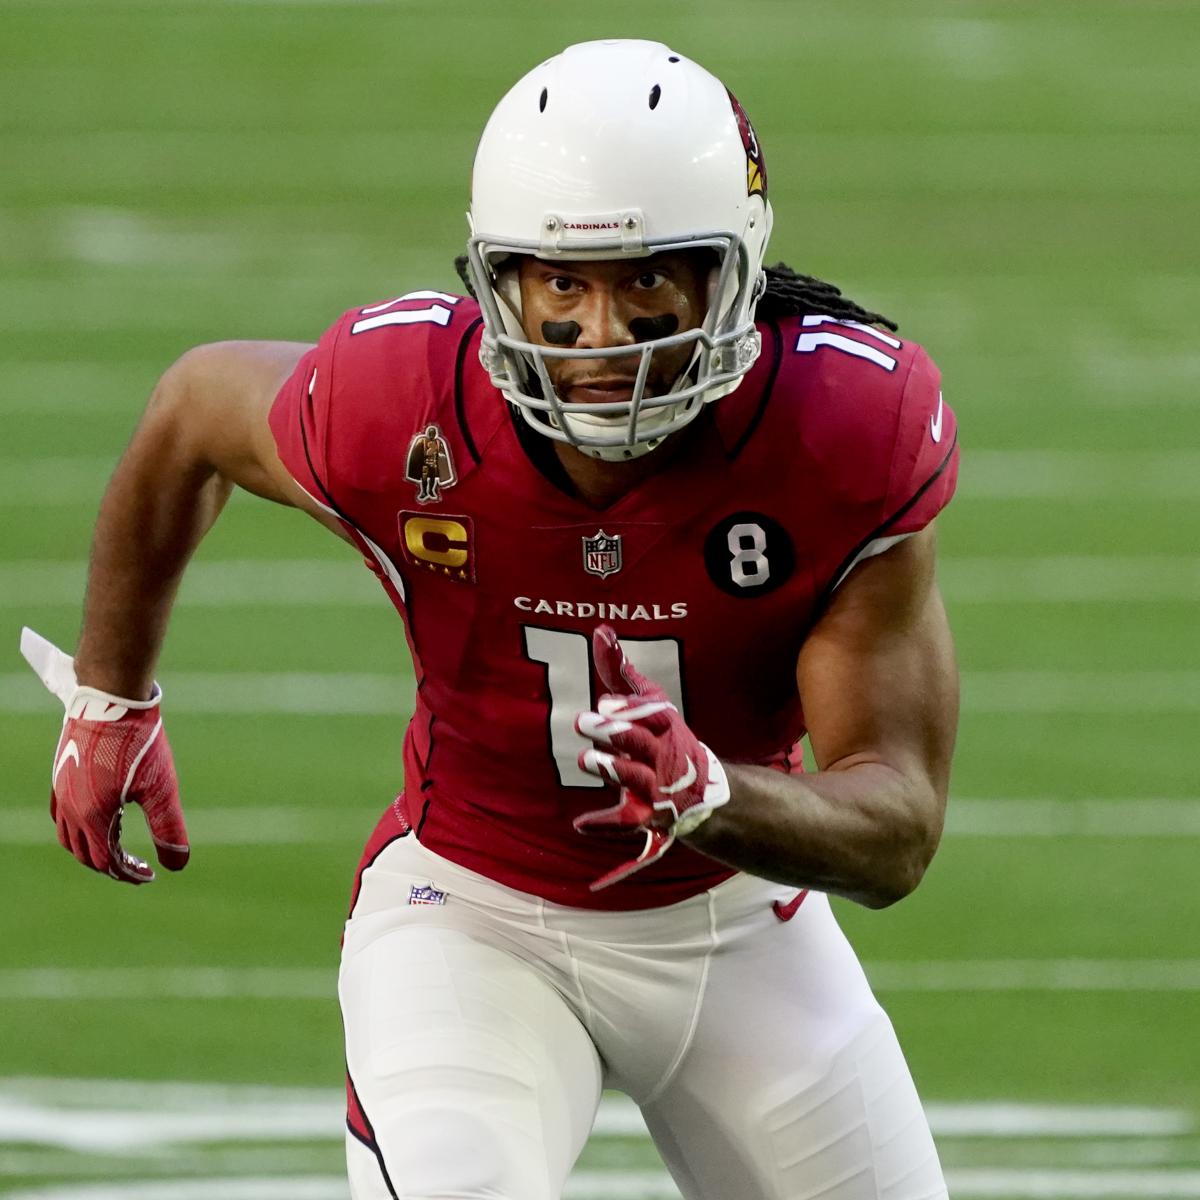 NFL Execs Reportedly Ask Larry Fitzgerald to Retire Earlier than 2021 Season